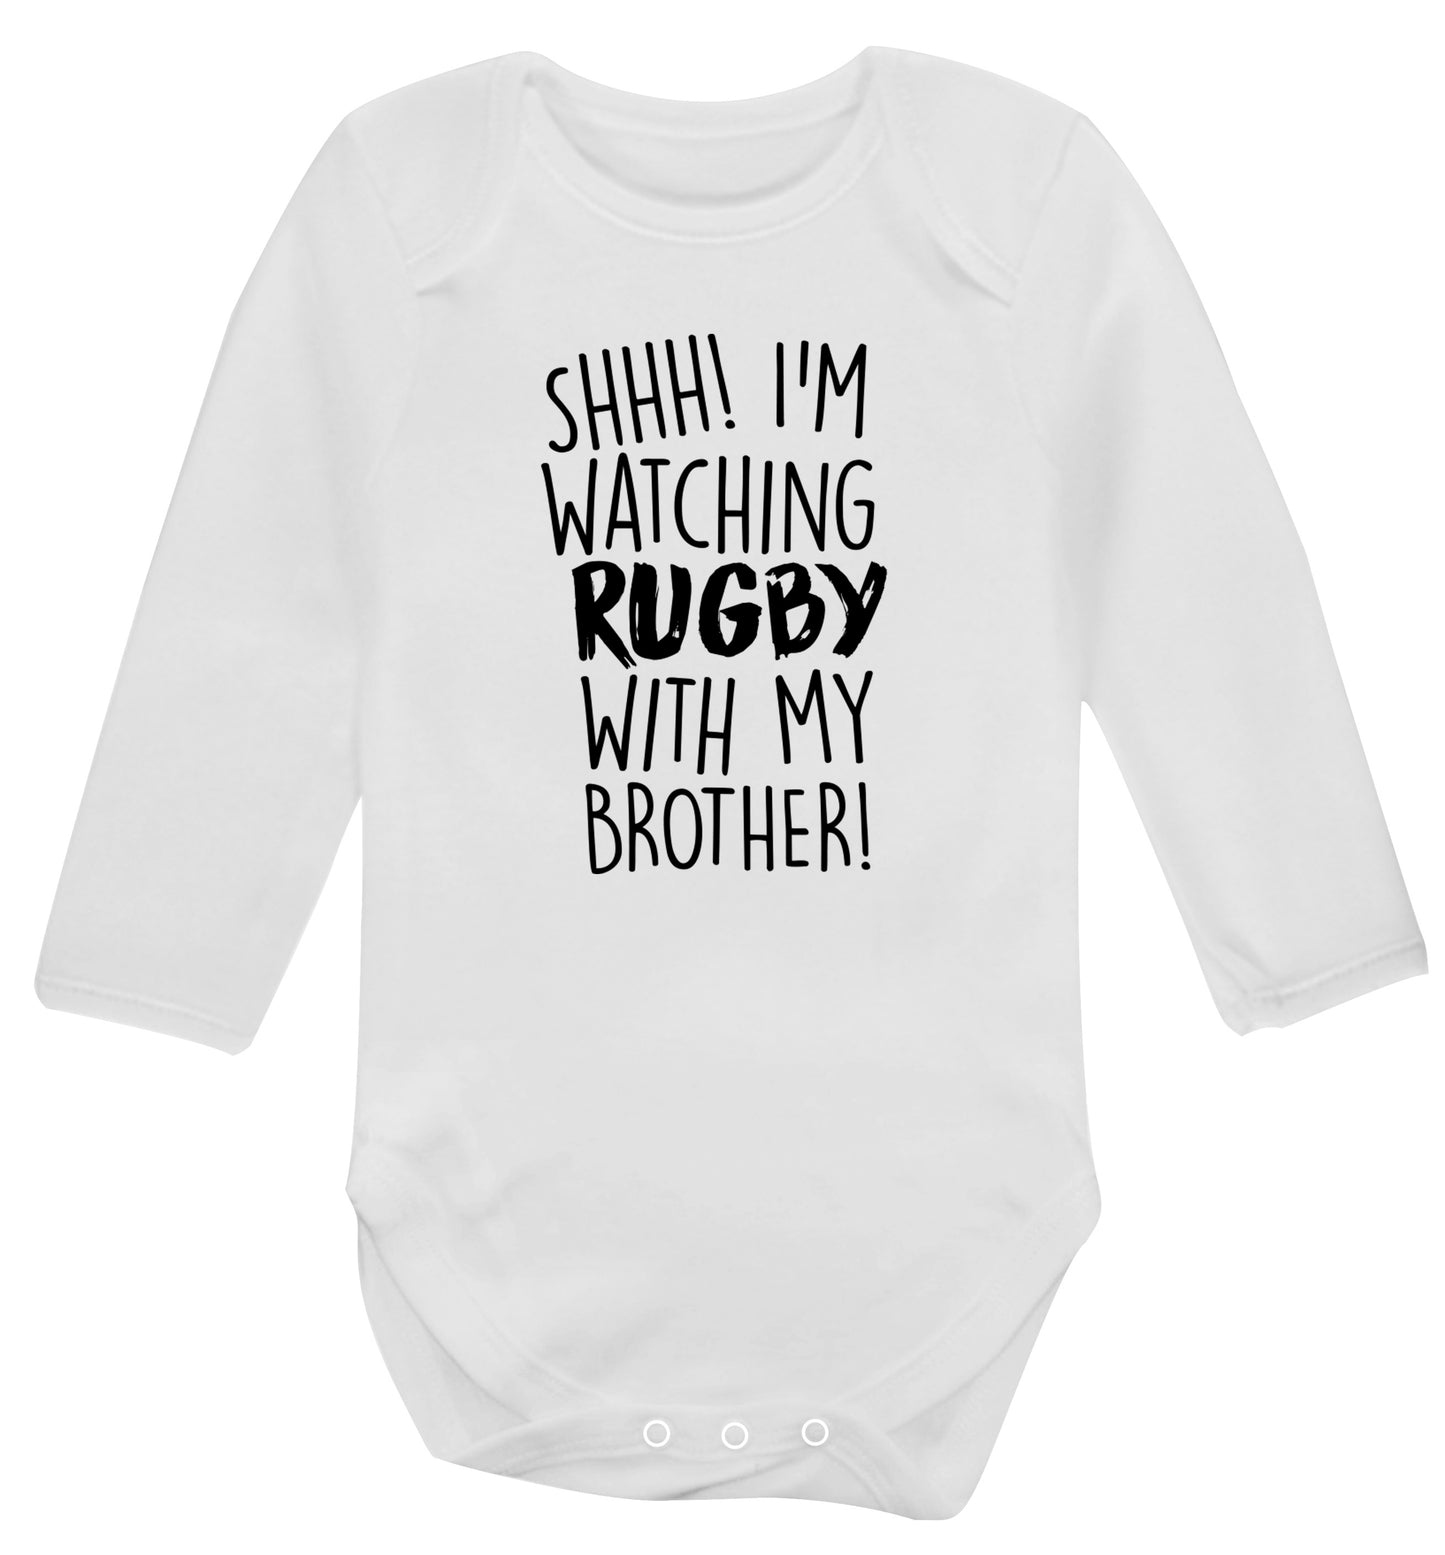 Shh... I'm watching rugby with my brother Baby Vest long sleeved white 6-12 months